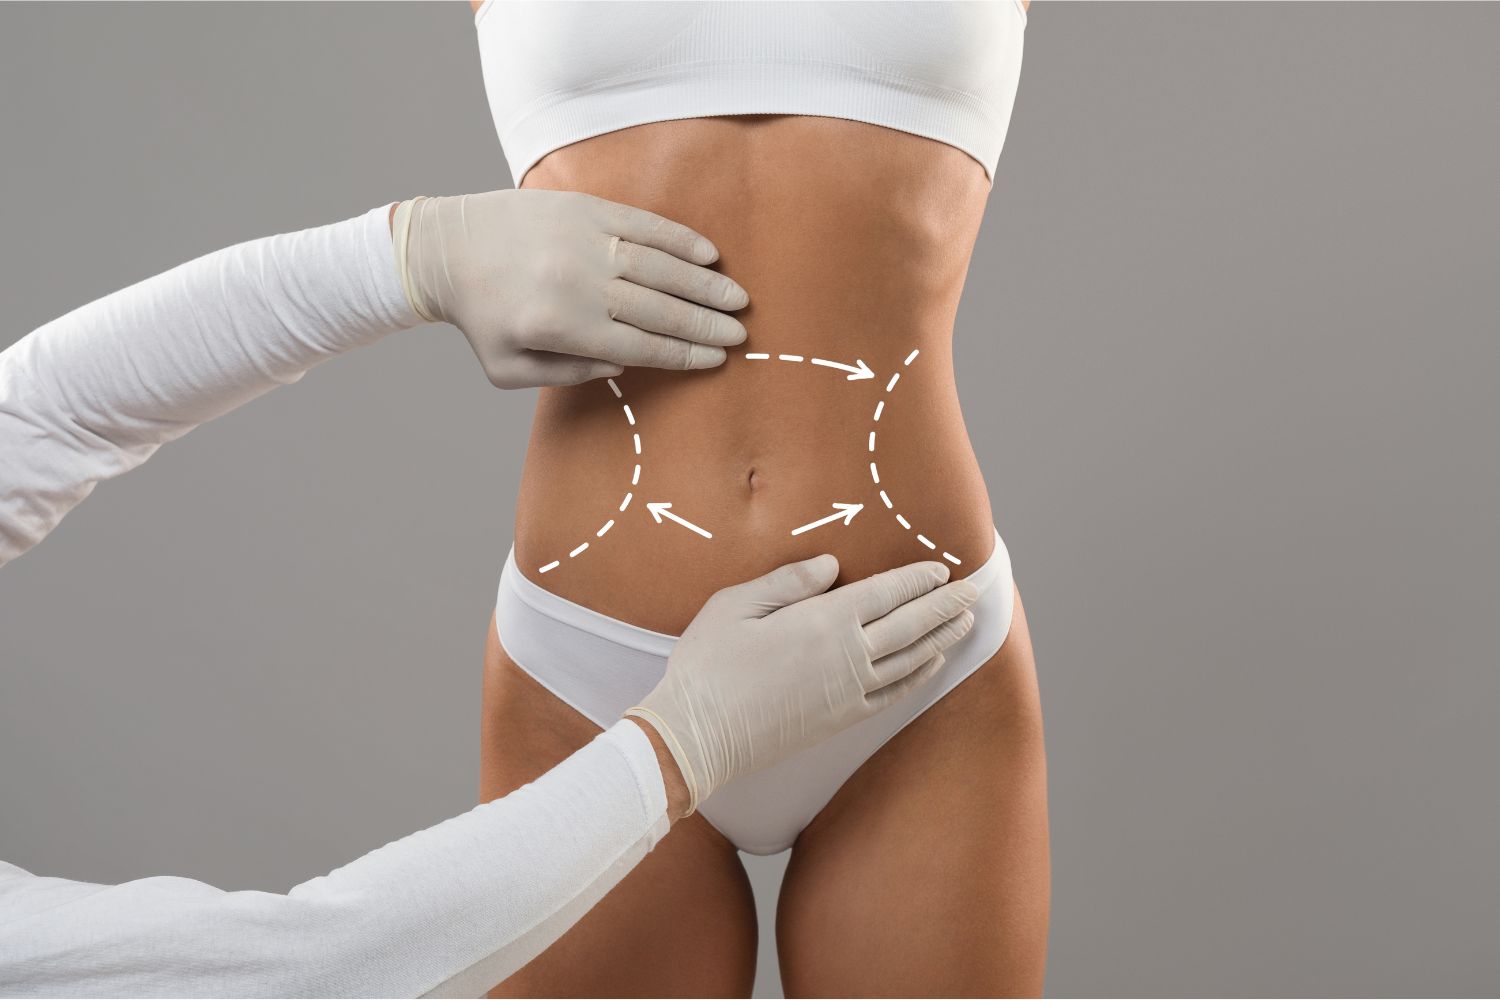 exion: non-invasive fat reduction and skin tightening